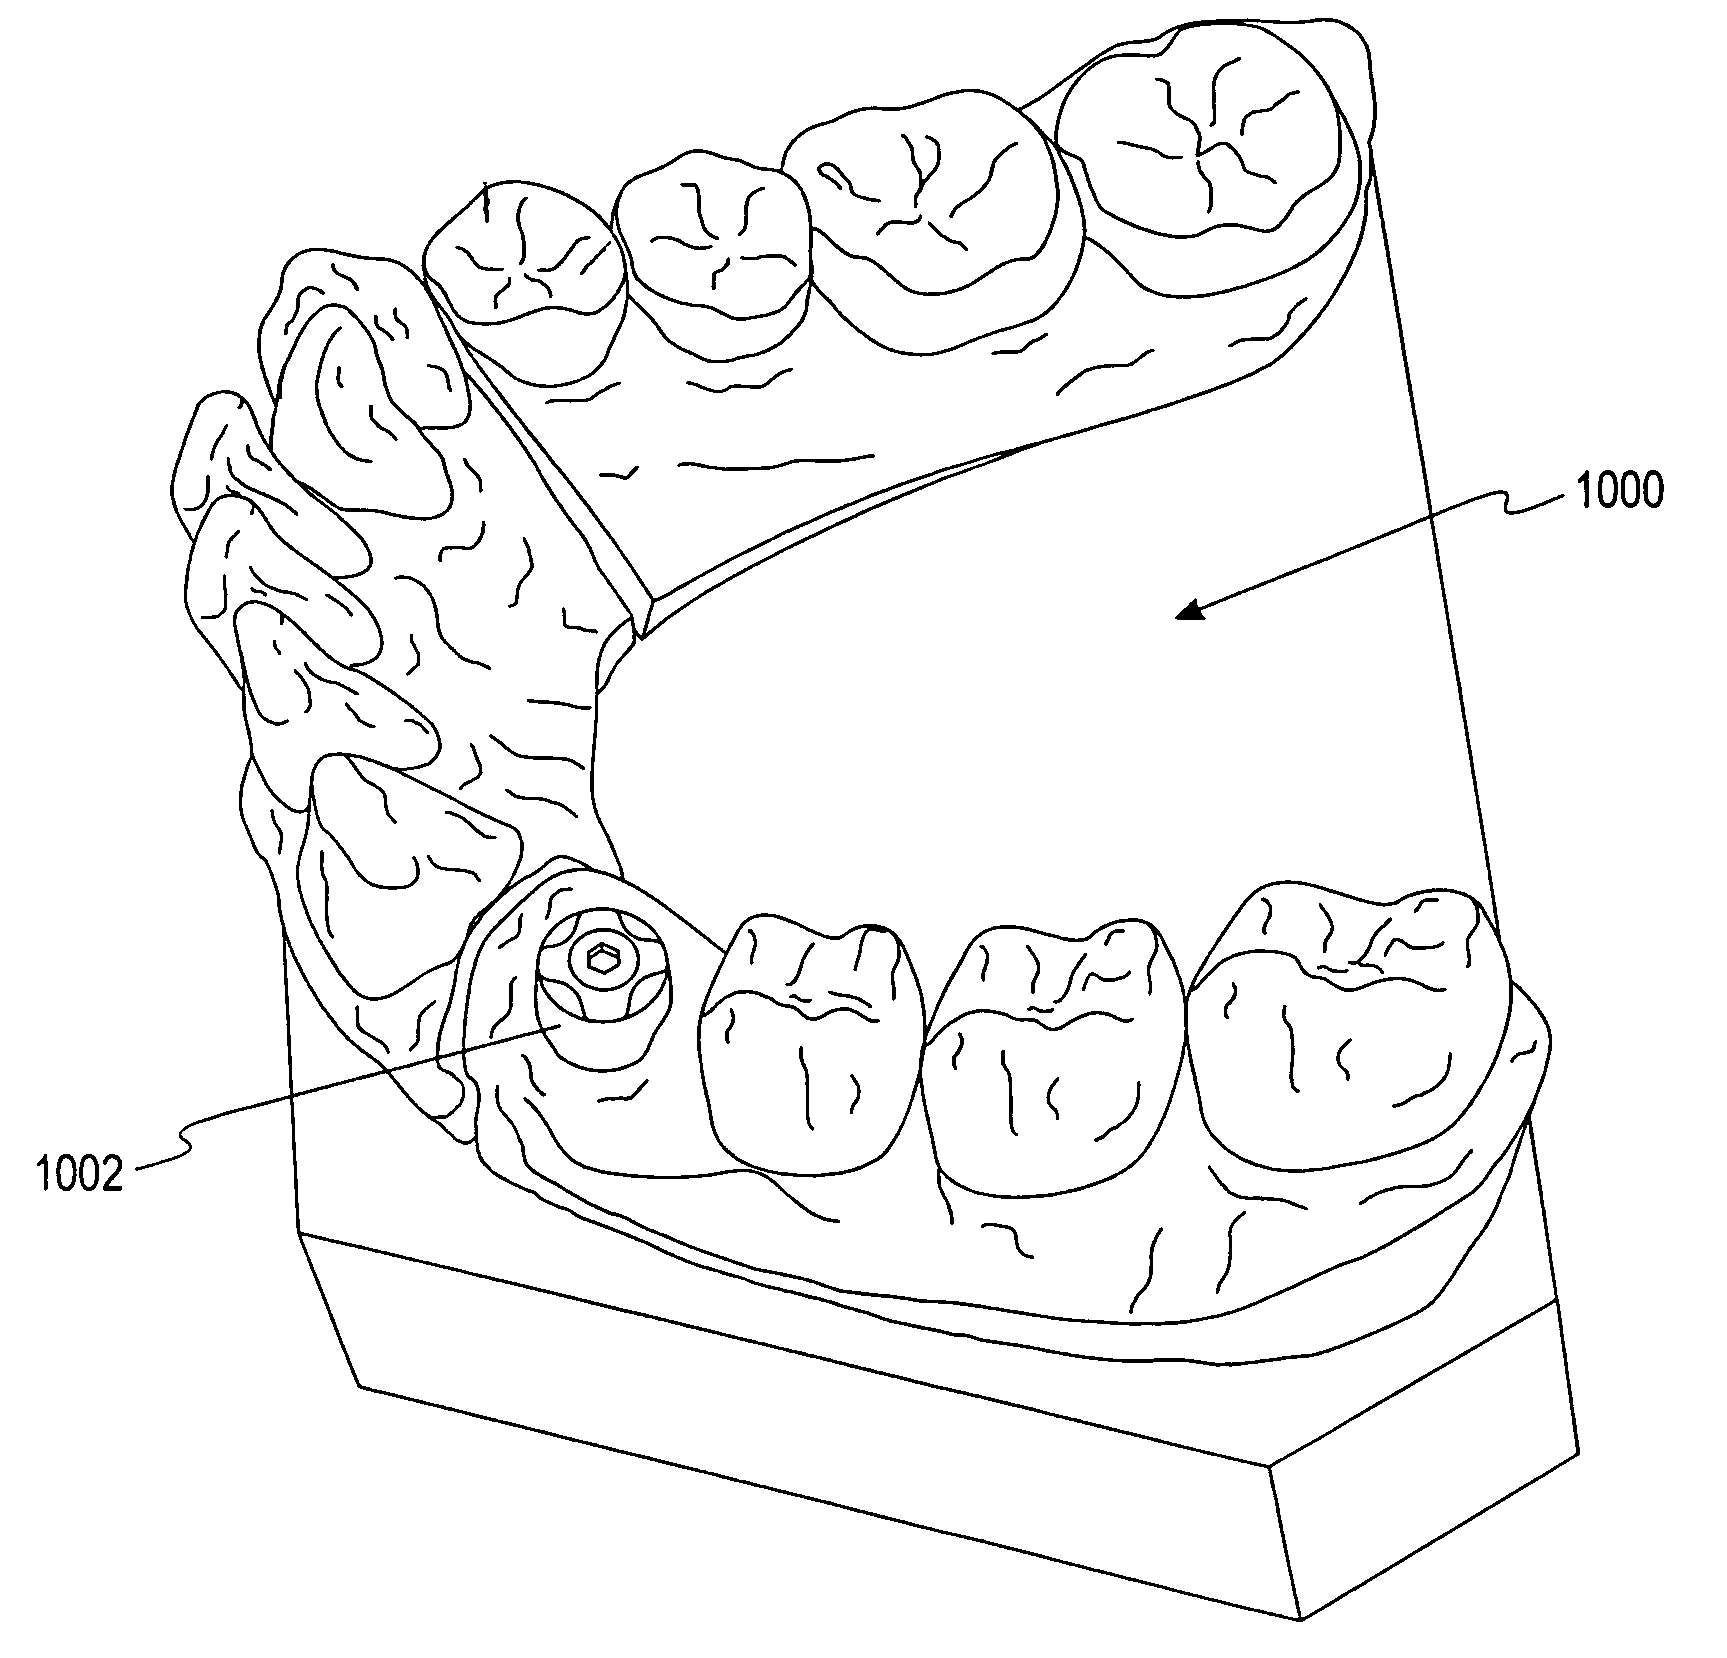 Methods for placing an implant analog in a physical model of the patient's mouth